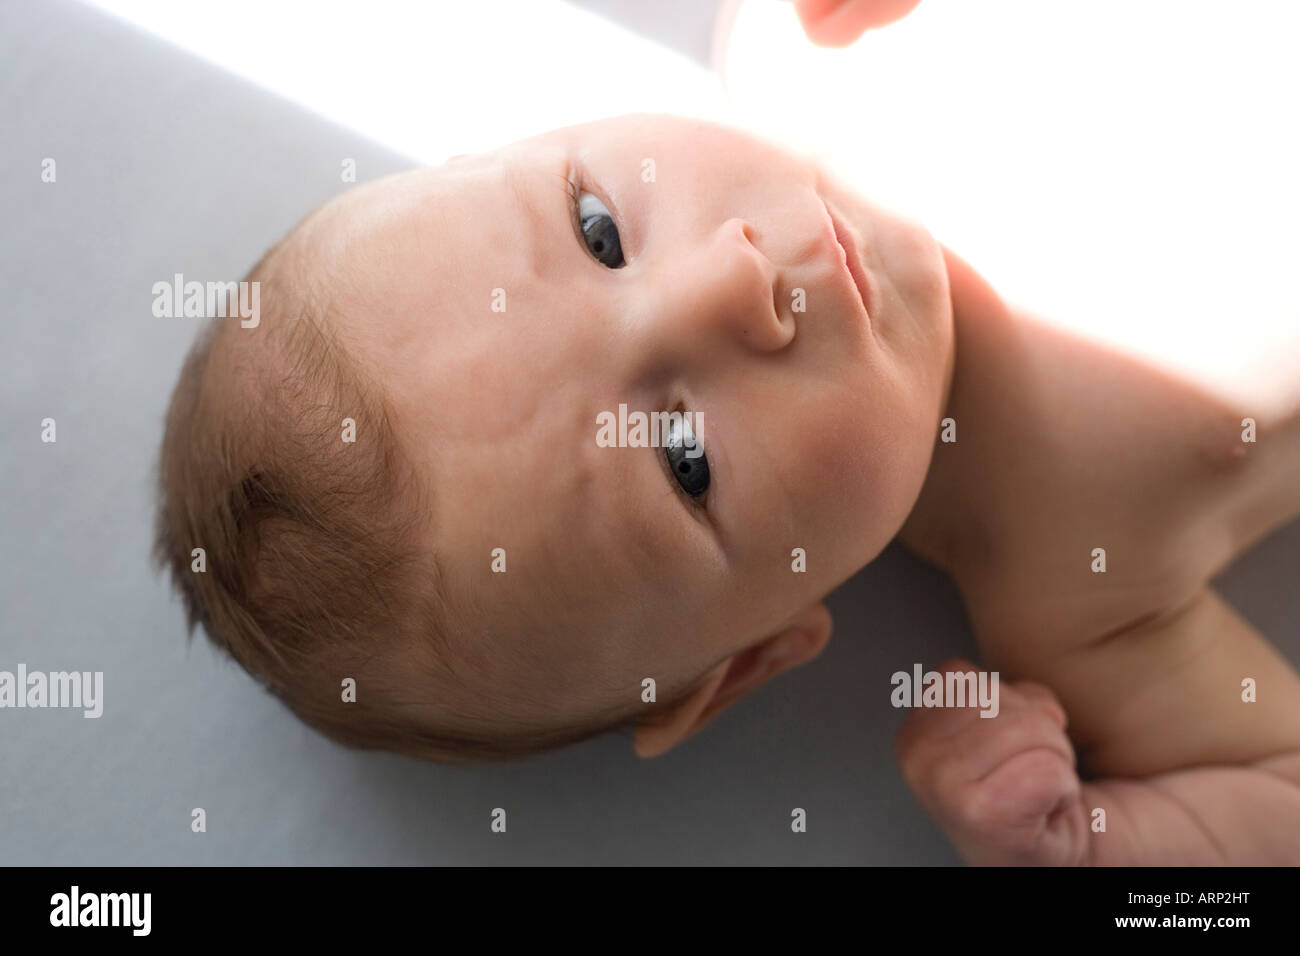 six week old newborn baby face serious stare alert eye ready for the world Stock Photo